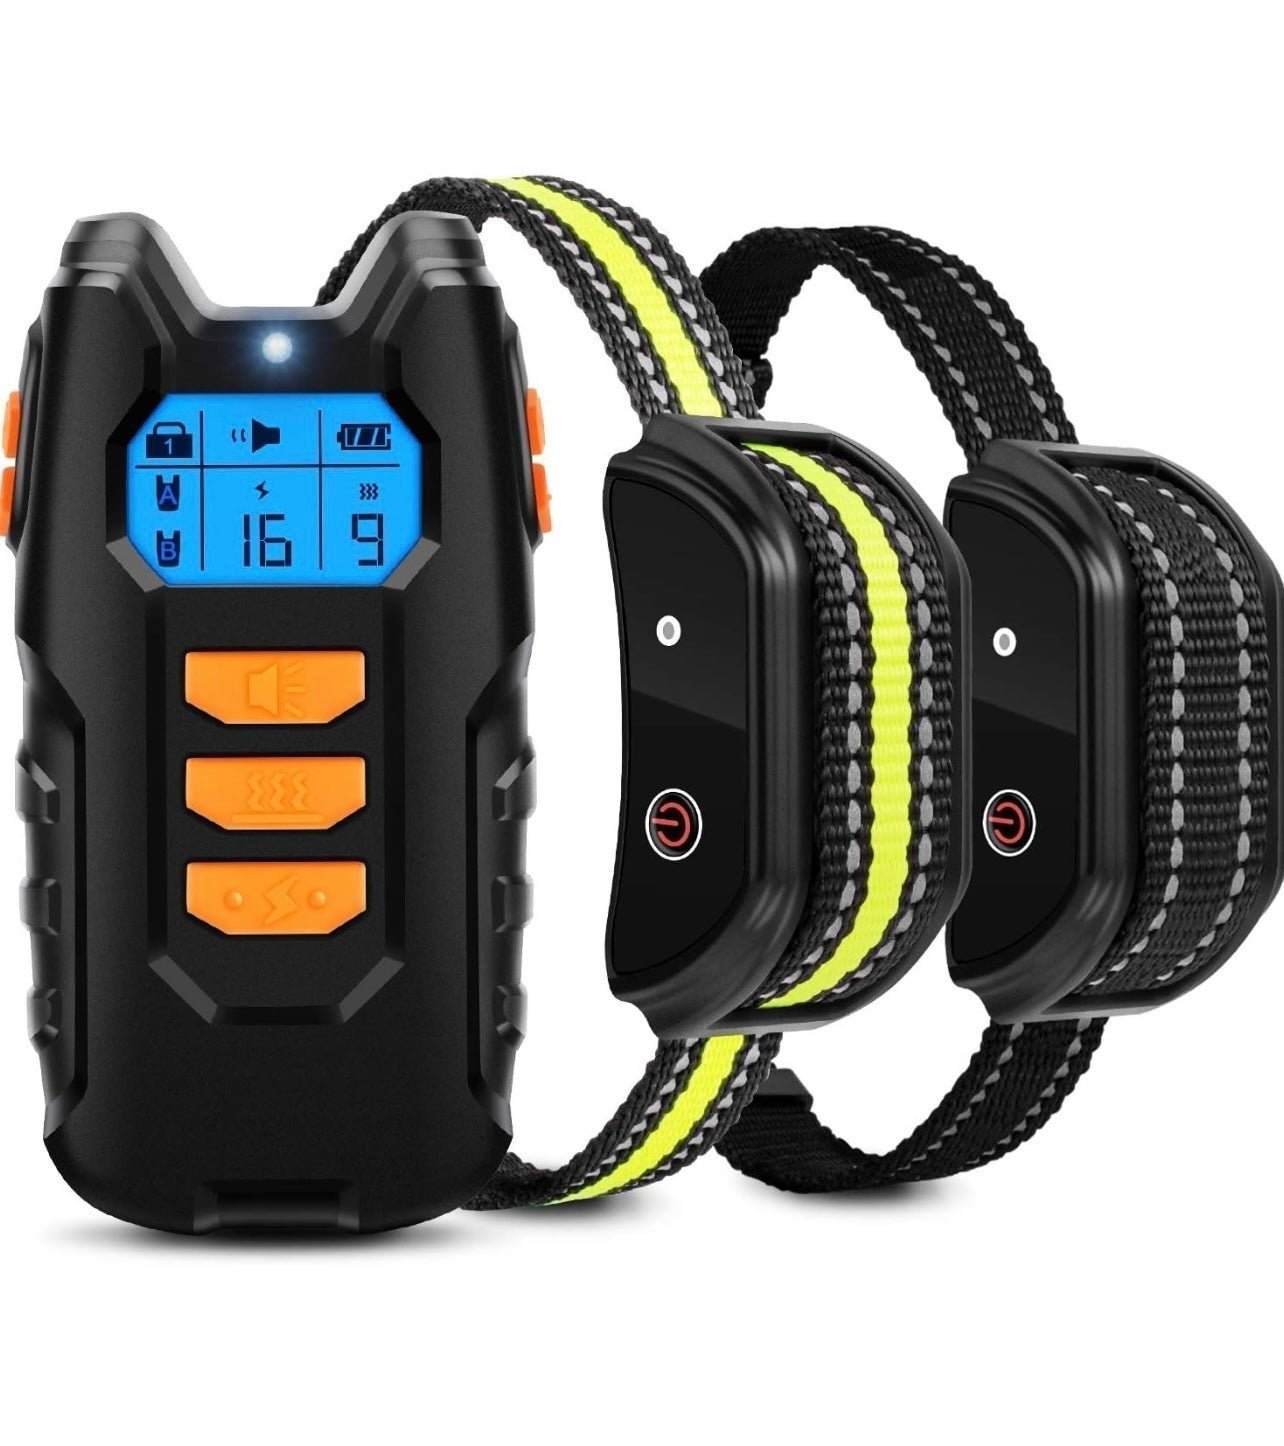 Dog Training Collar , Shock Collar for Dogs with Remote , 2 Receiver Rechargeabl Ogke9immz